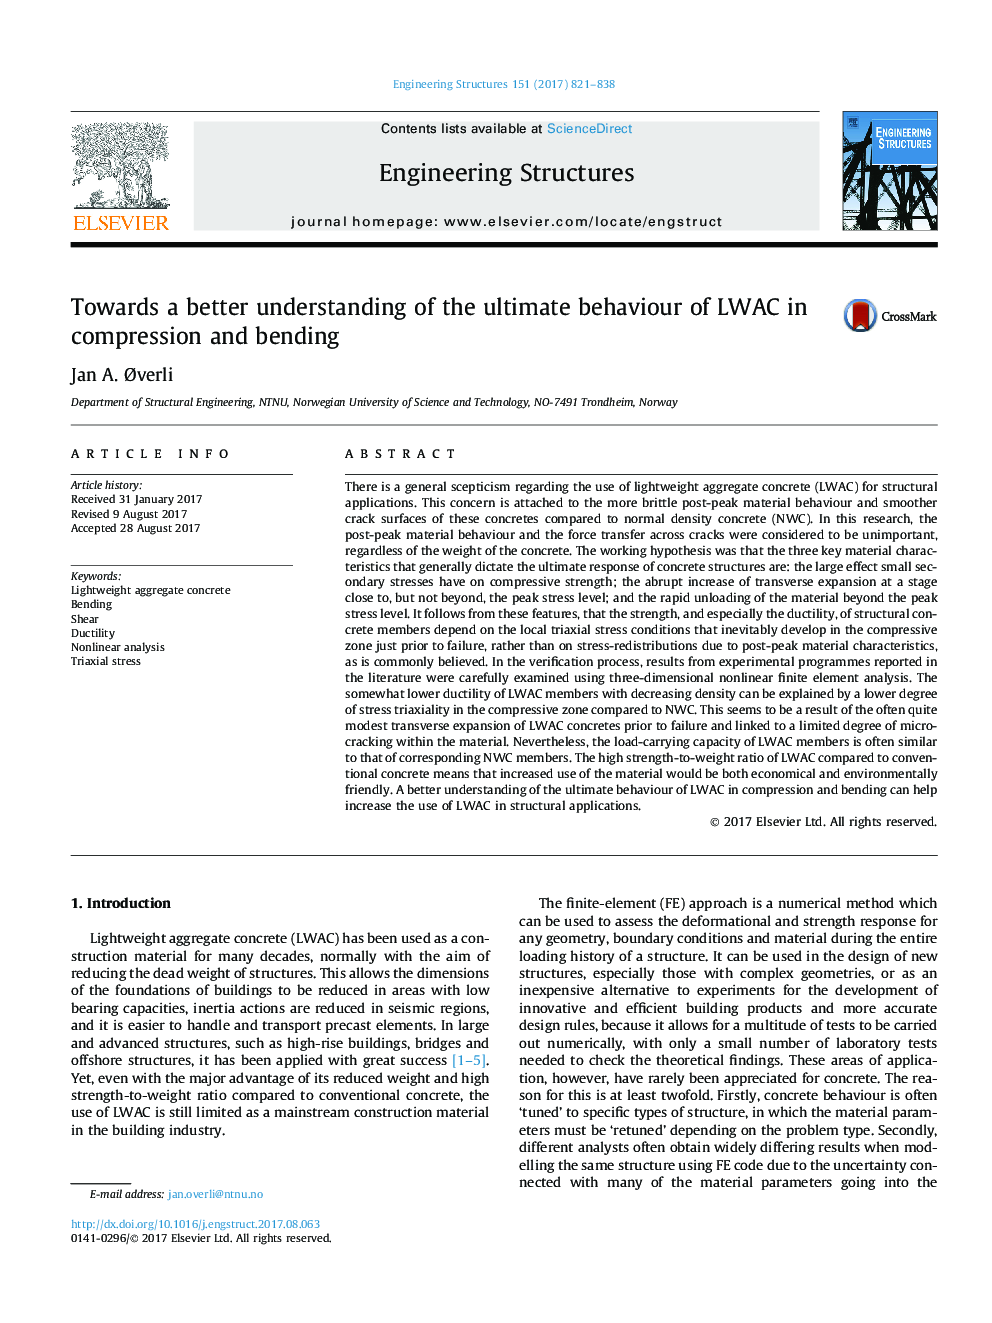 Towards a better understanding of the ultimate behaviour of LWAC in compression and bending